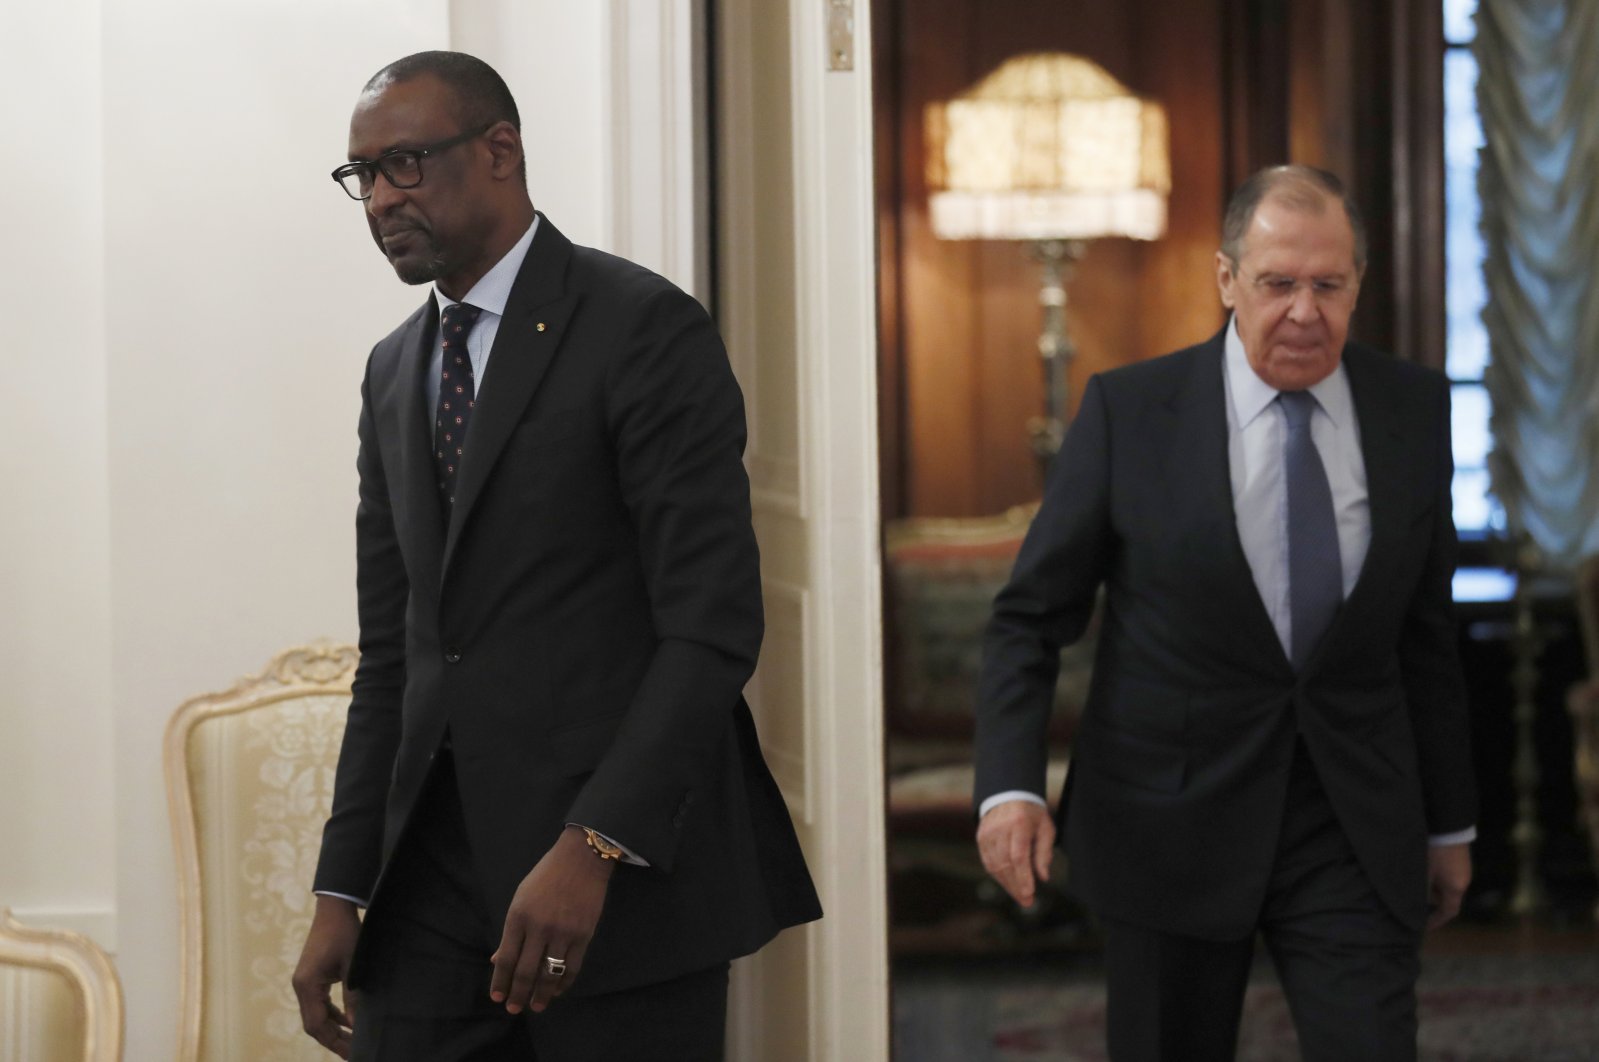 Russia&#039;s Foreign Minister Sergei Lavrov and Mali&#039;s Minister of Foreign Affairs and International Cooperation Abdoulaye Diop enter a hall during a meeting in Moscow, Russia, Nov. 11, 2021. (Reuters Photo)